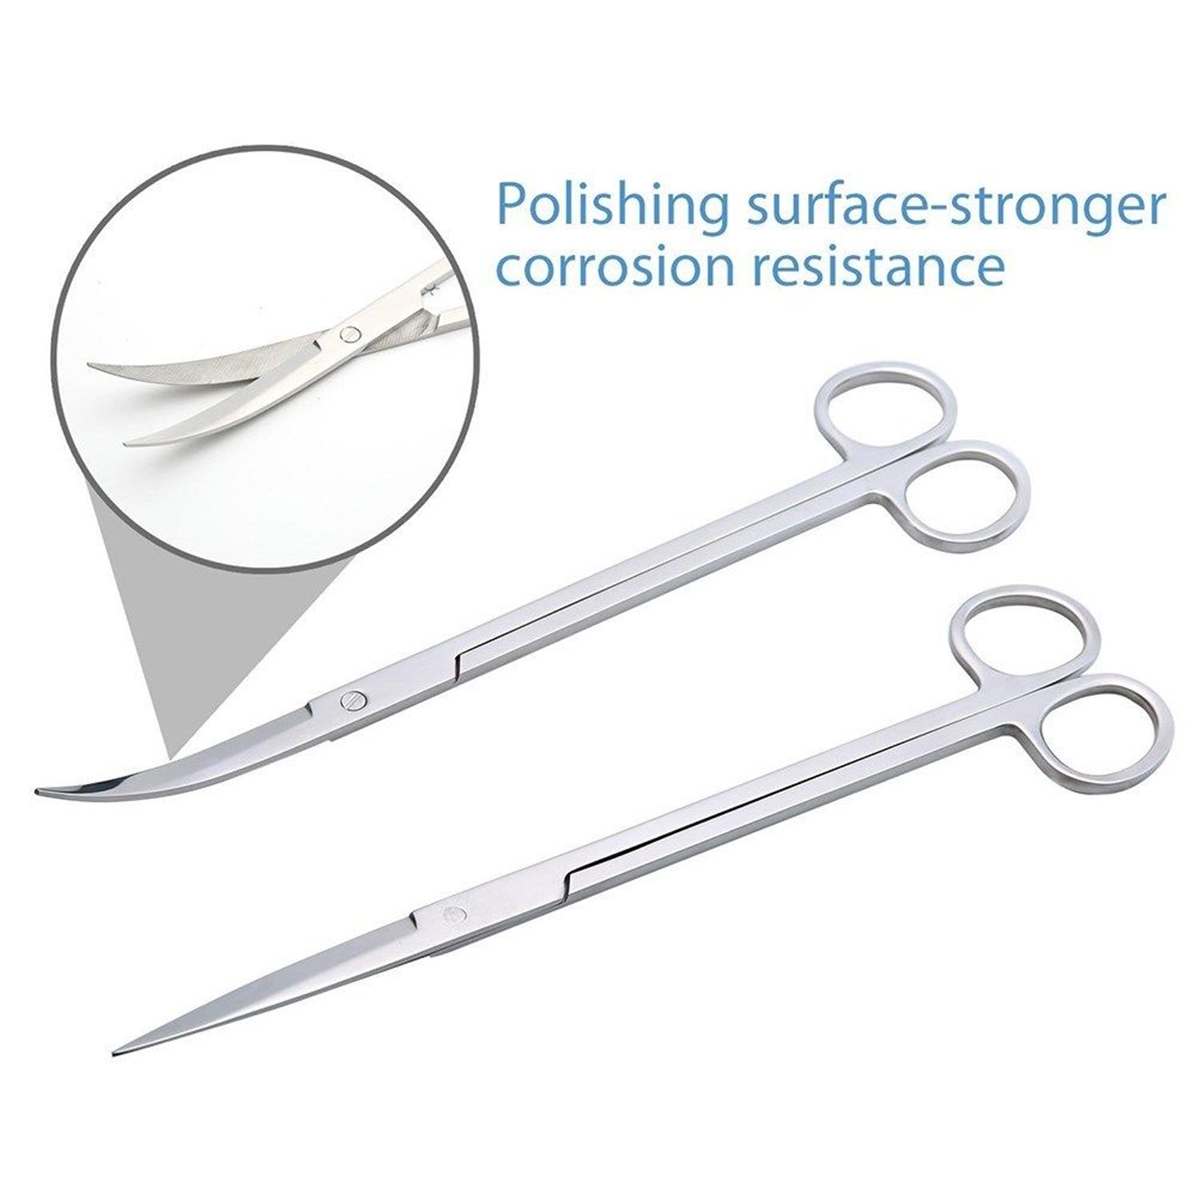 5Pcs-Stainless-Steel-Aquarium-Aquascaping-Tank-Aquatic-Plant-Fish-Cutter-Tweezers-Tool-with-Pouch-1378932-4